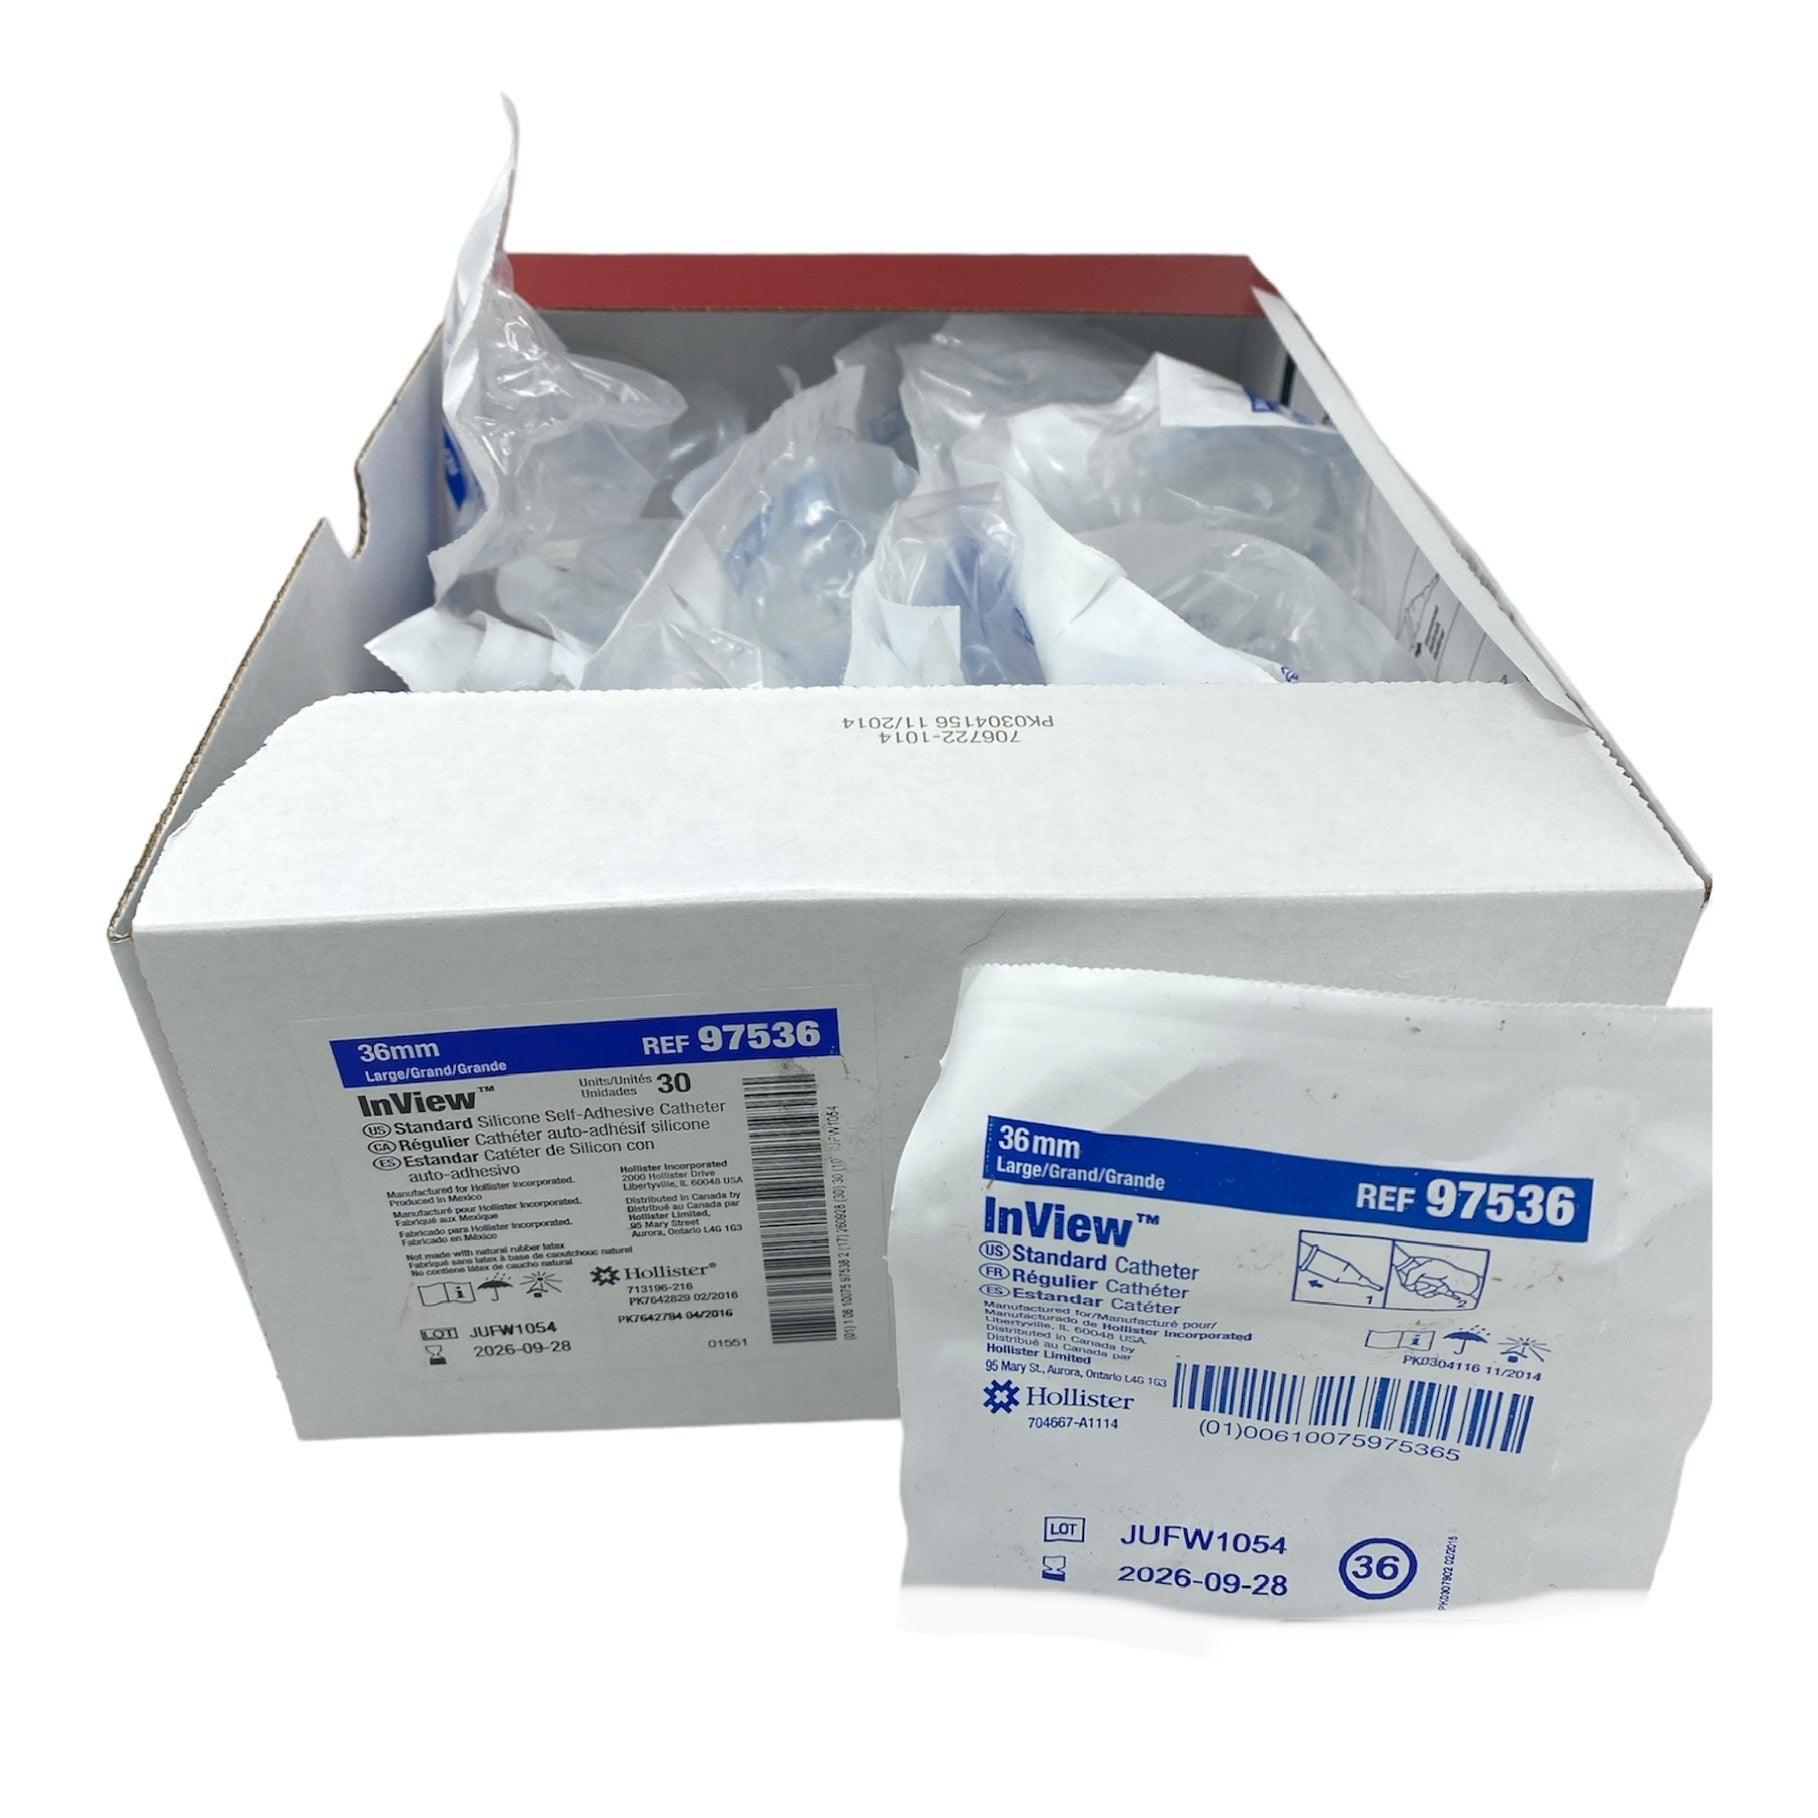 InView Silicon Male External Catheter| Box of 30